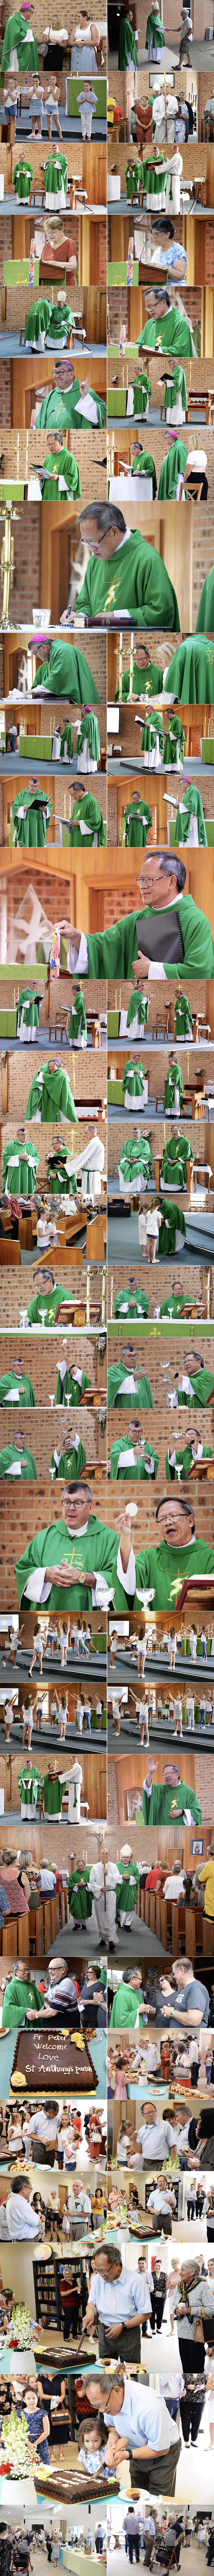 The Installation of Fr Peter as PP - Sunday 16 February, 2020